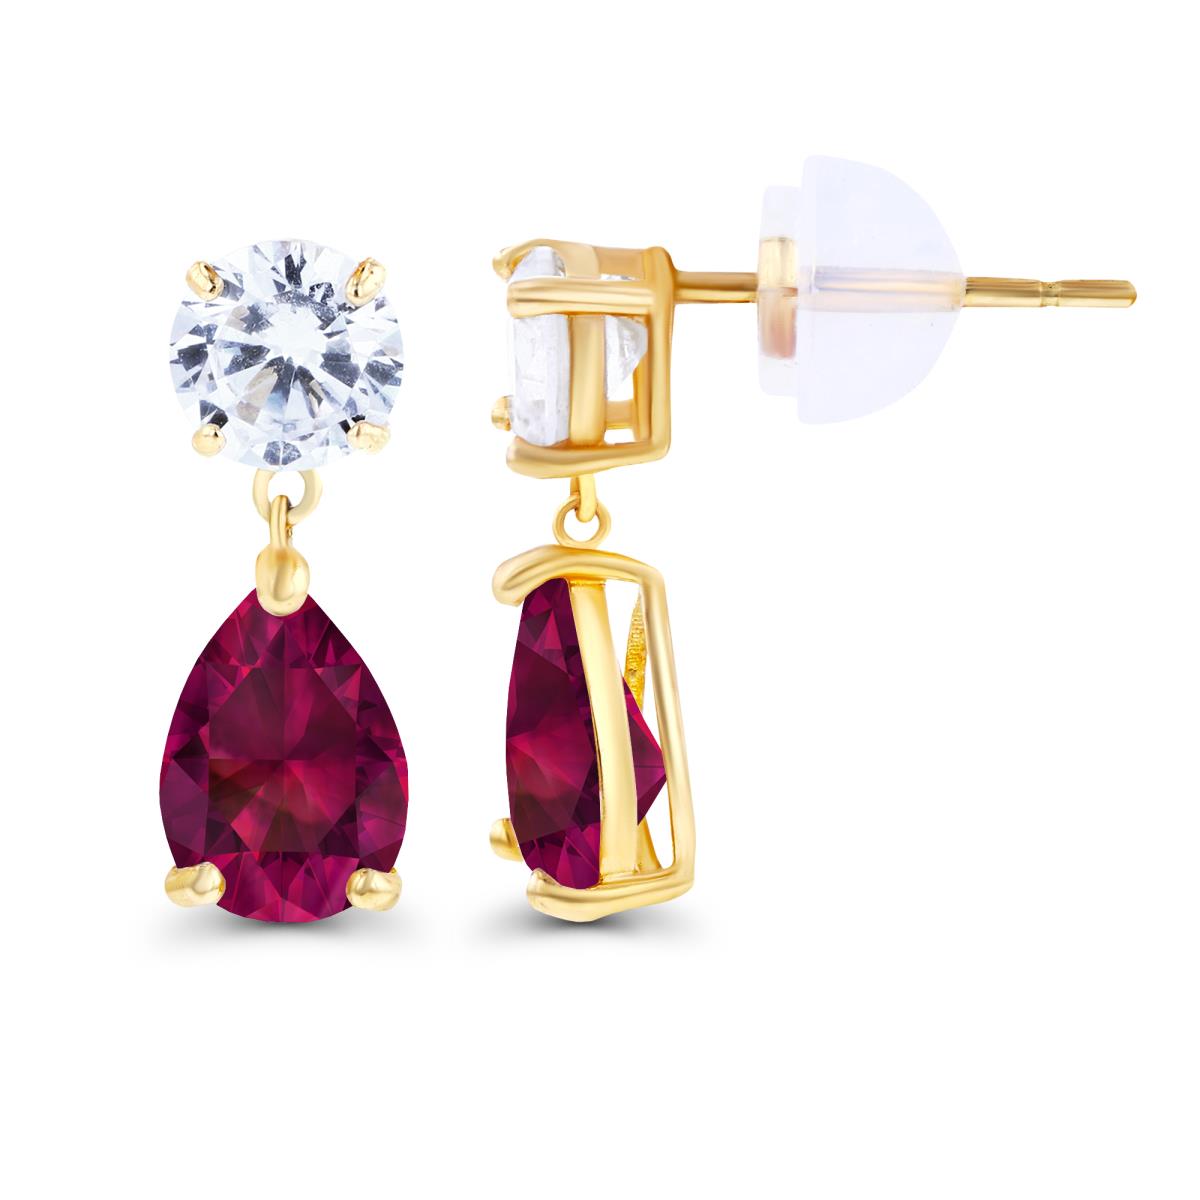 14K Yellow Gold 6x4mm Pear Created Ruby & 4.5mm Round Created White Sapphire Earrings with Silicon Backs